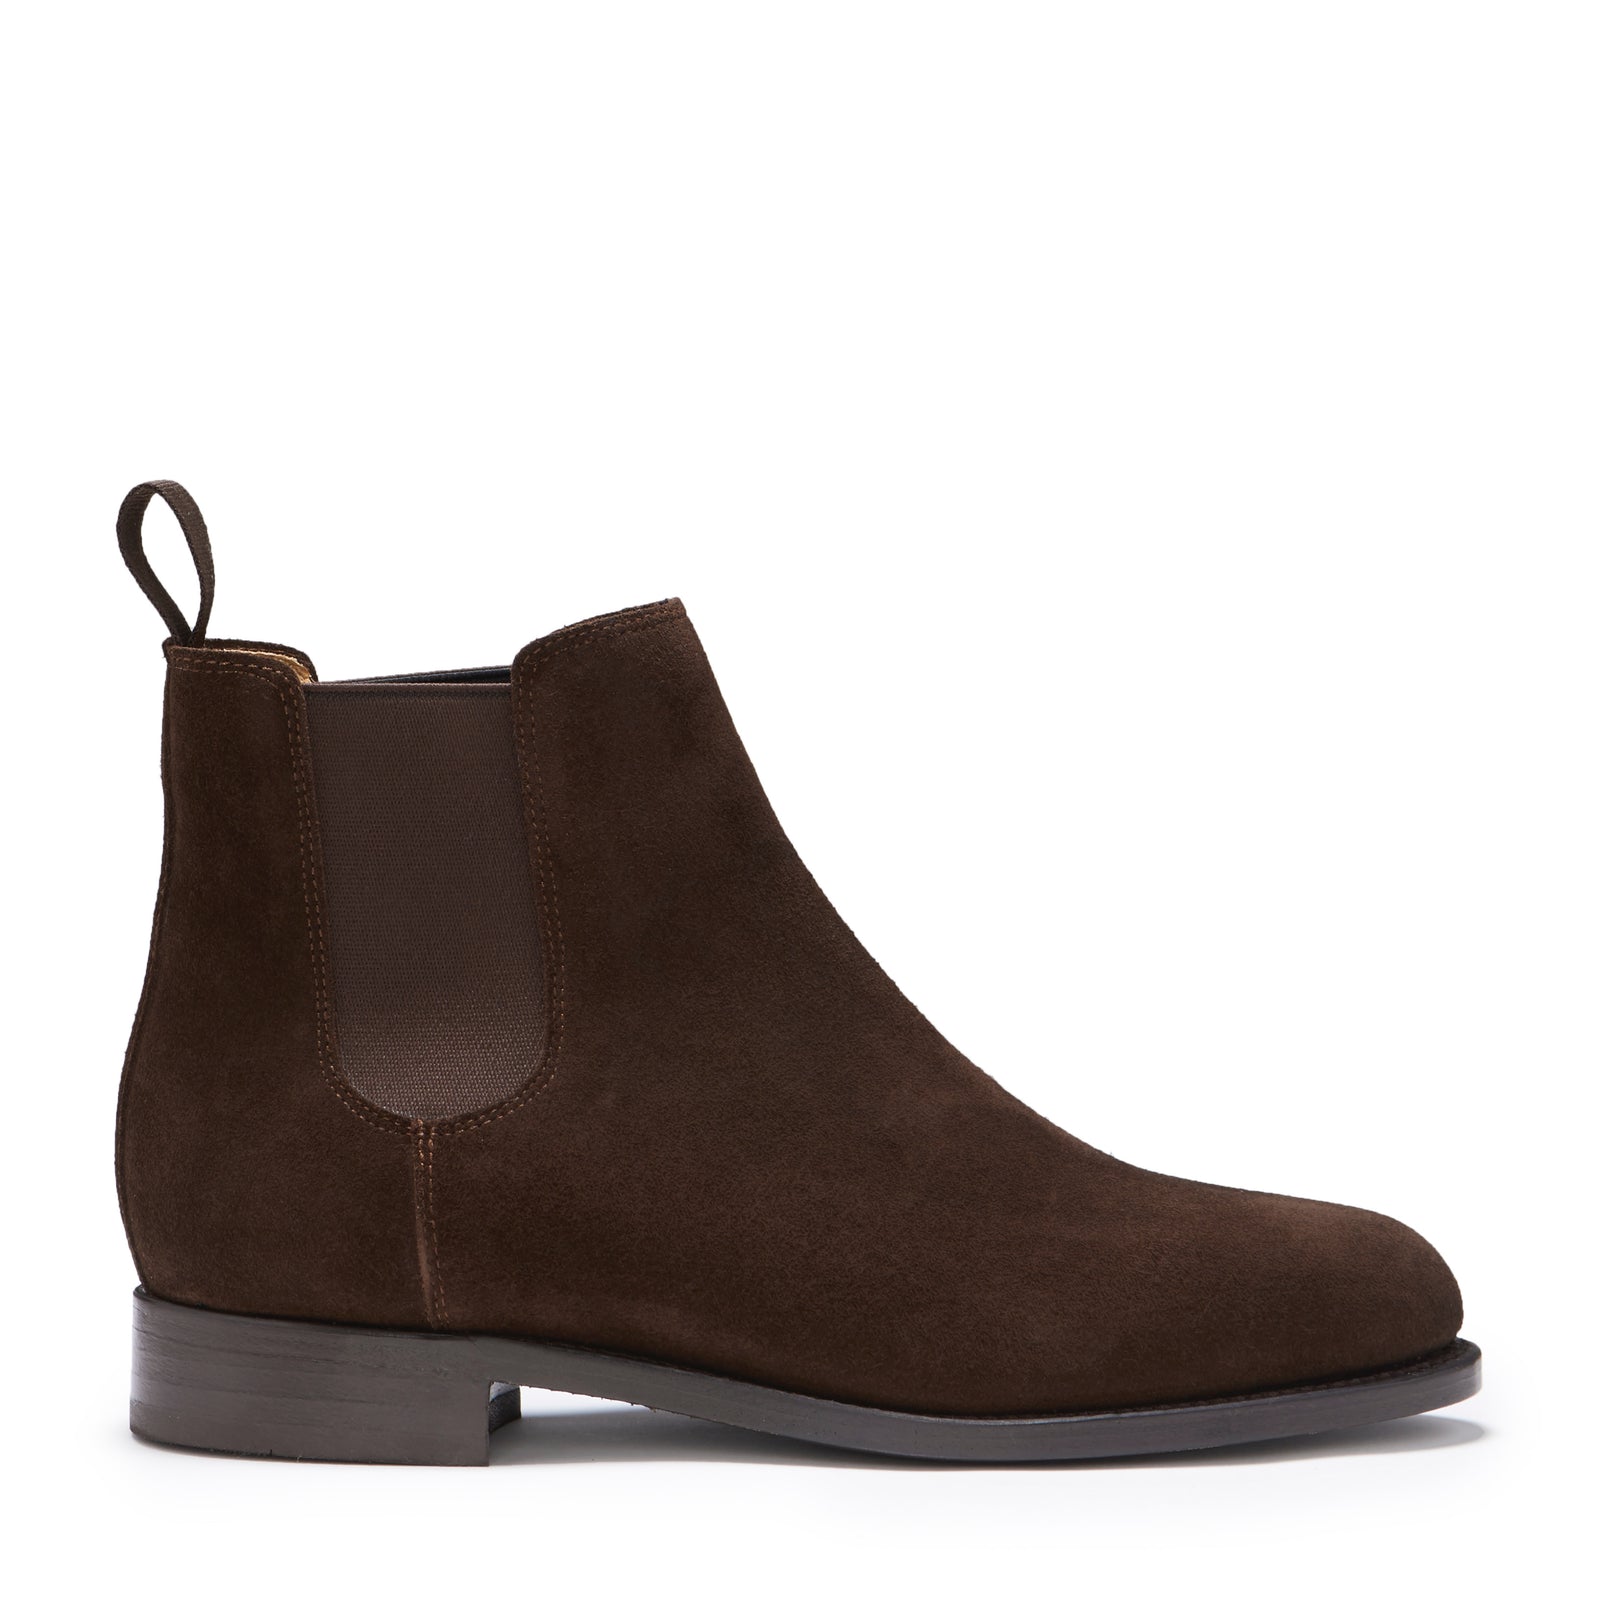 Women's Brown Suede Chelsea Boots, Welted Leather Sole